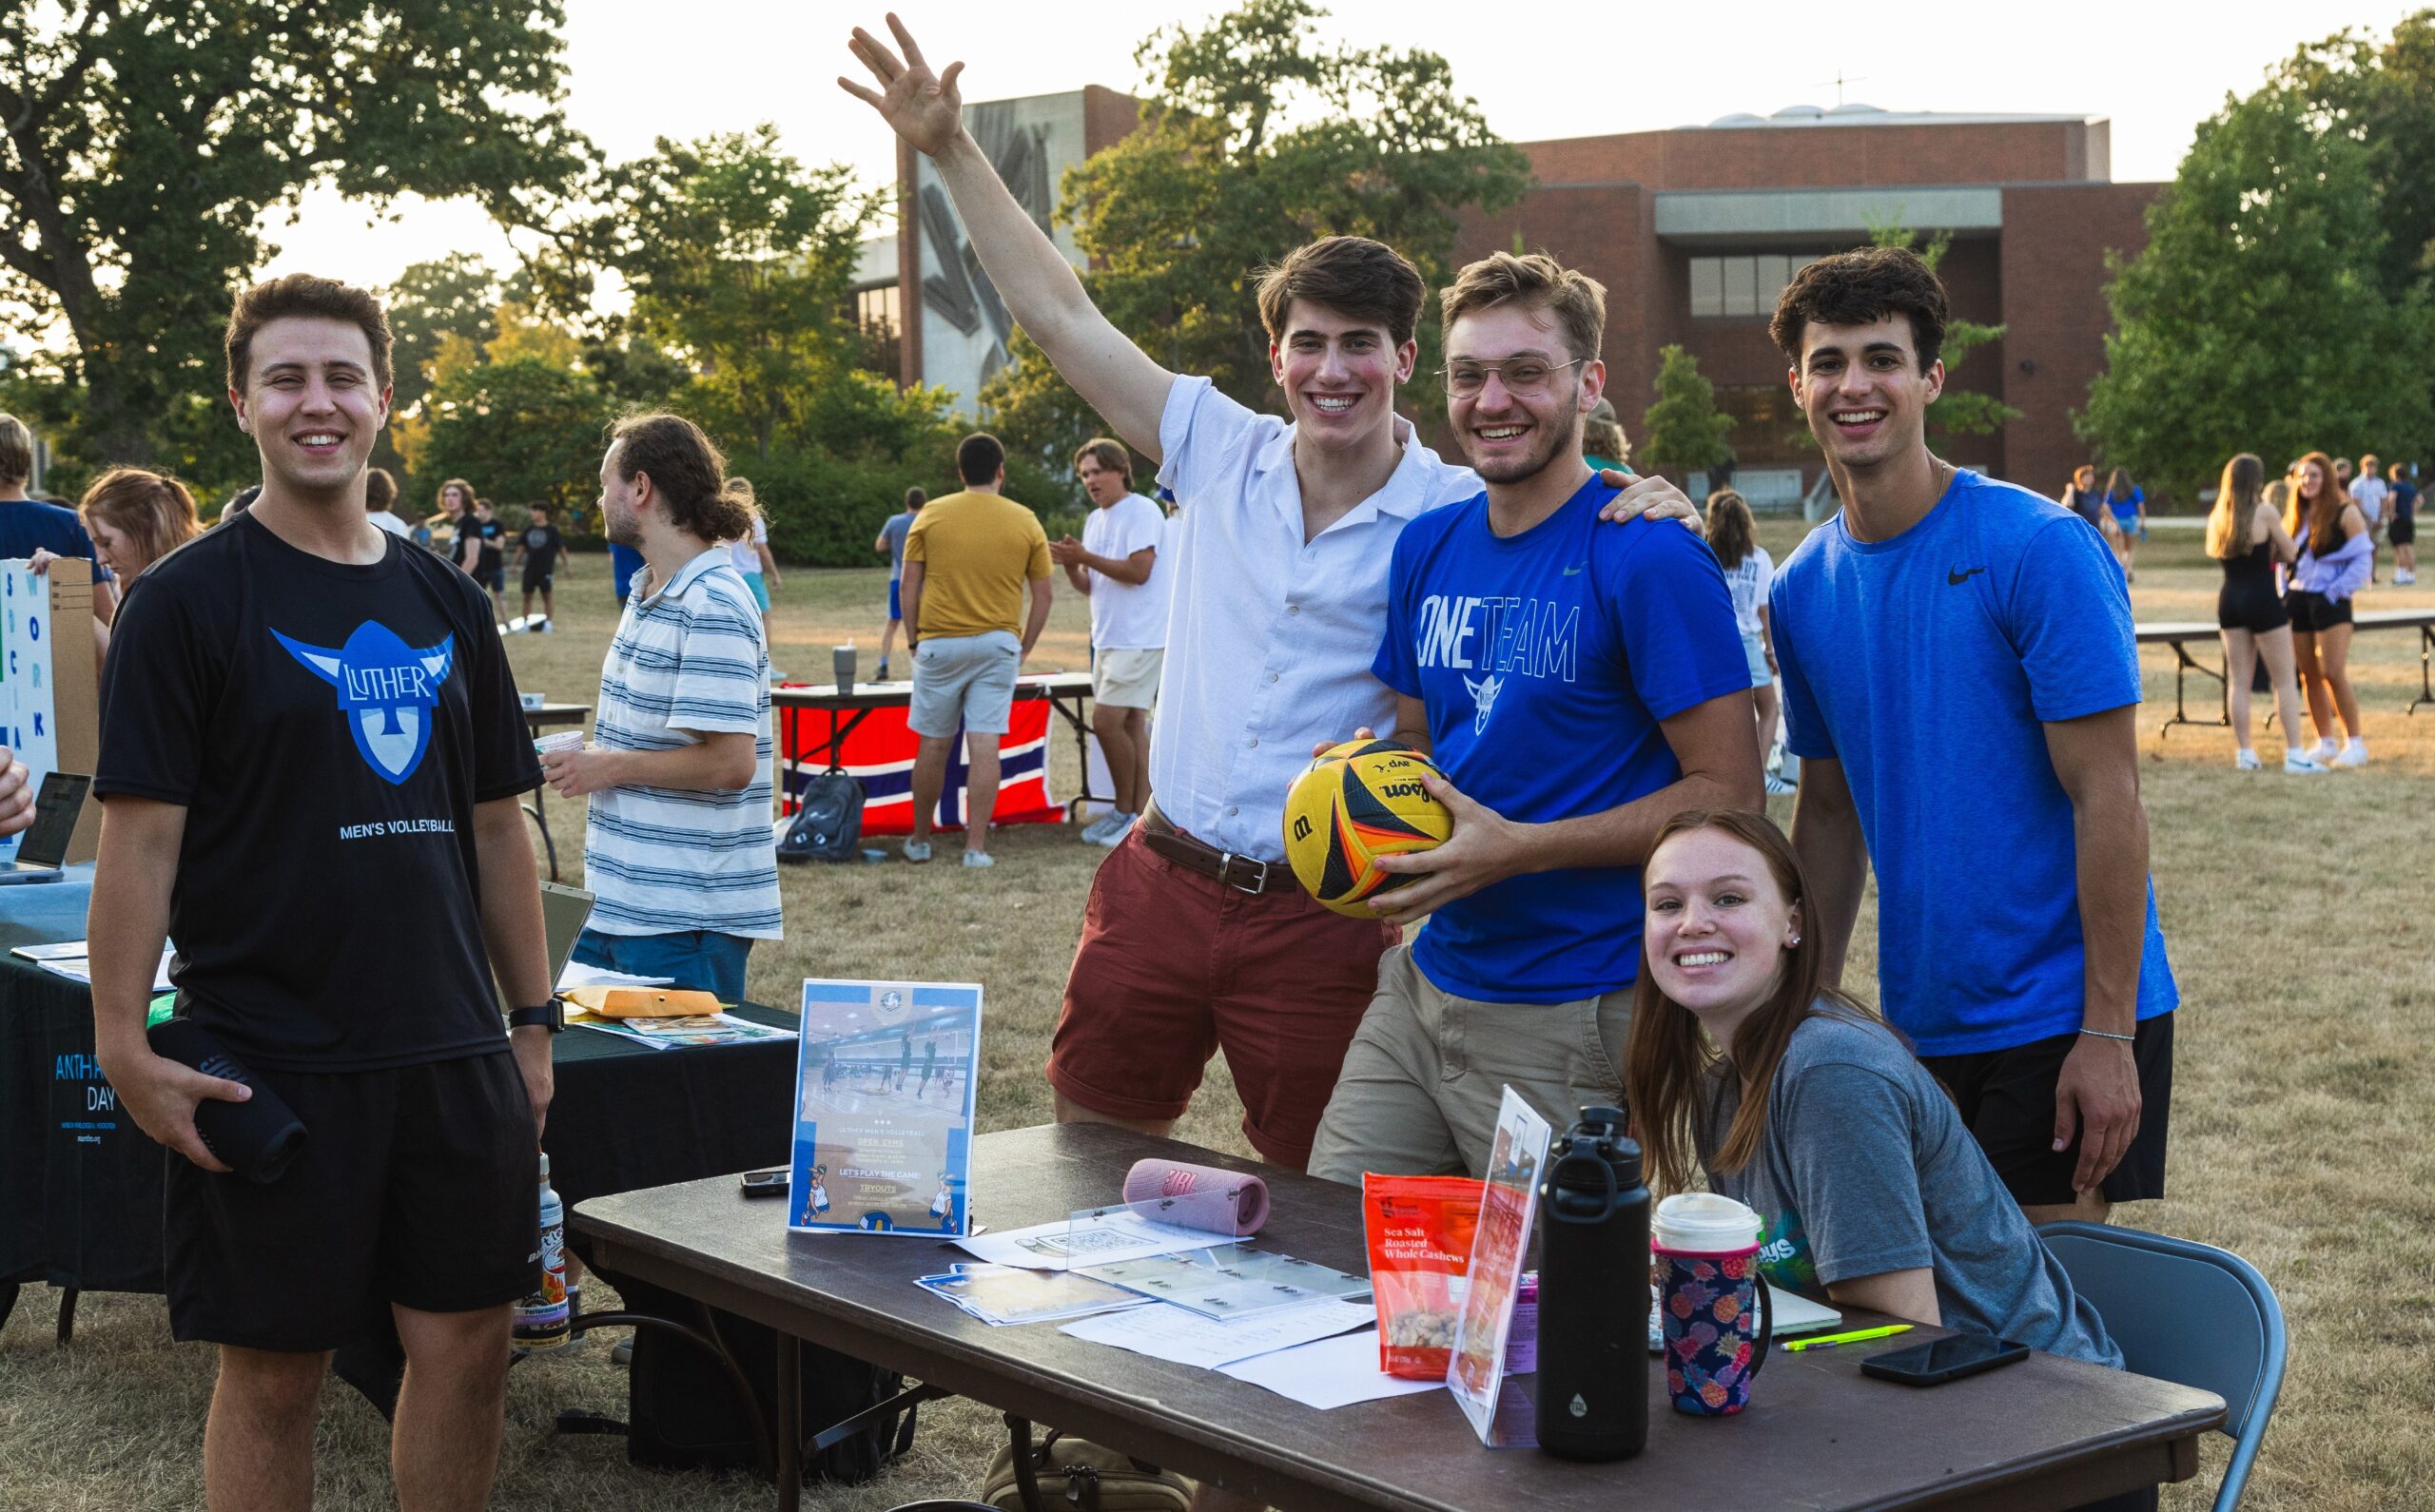 Students at a table for the student activities fair